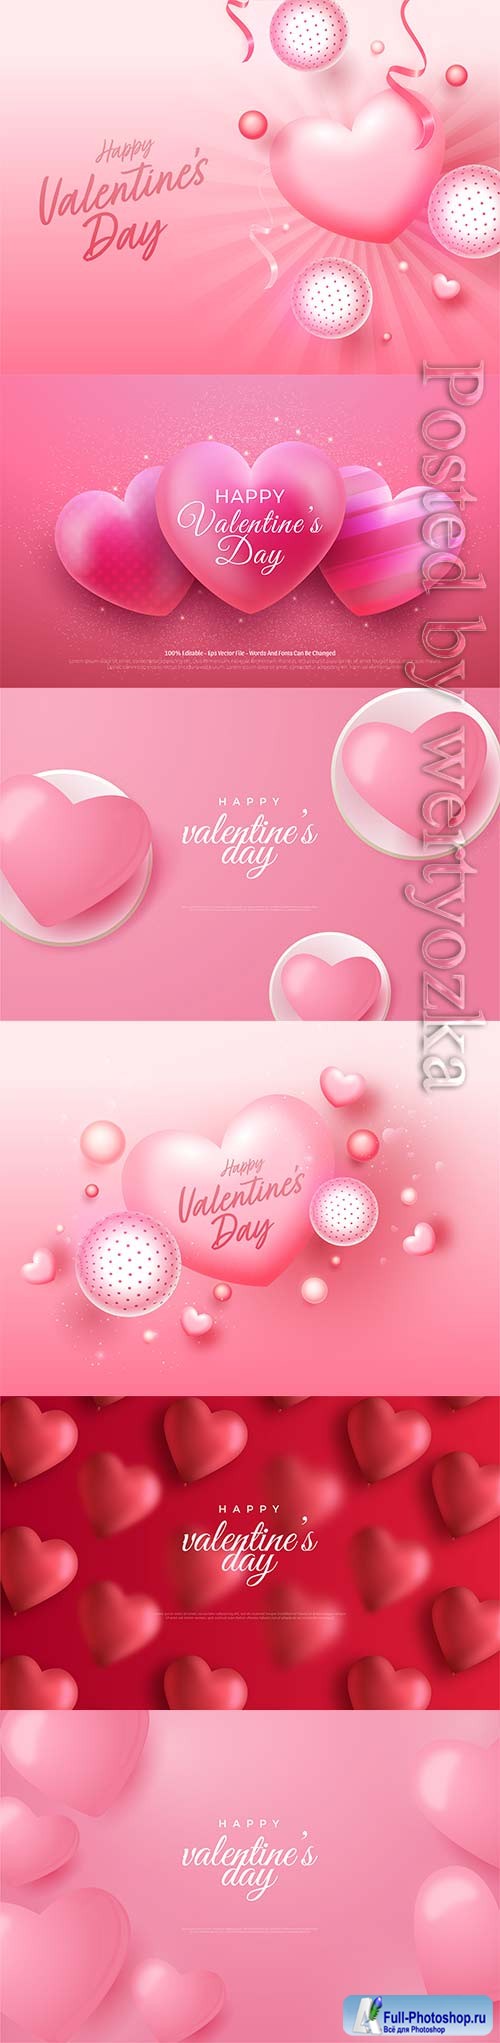 Valentine's day with realistic vector hearts